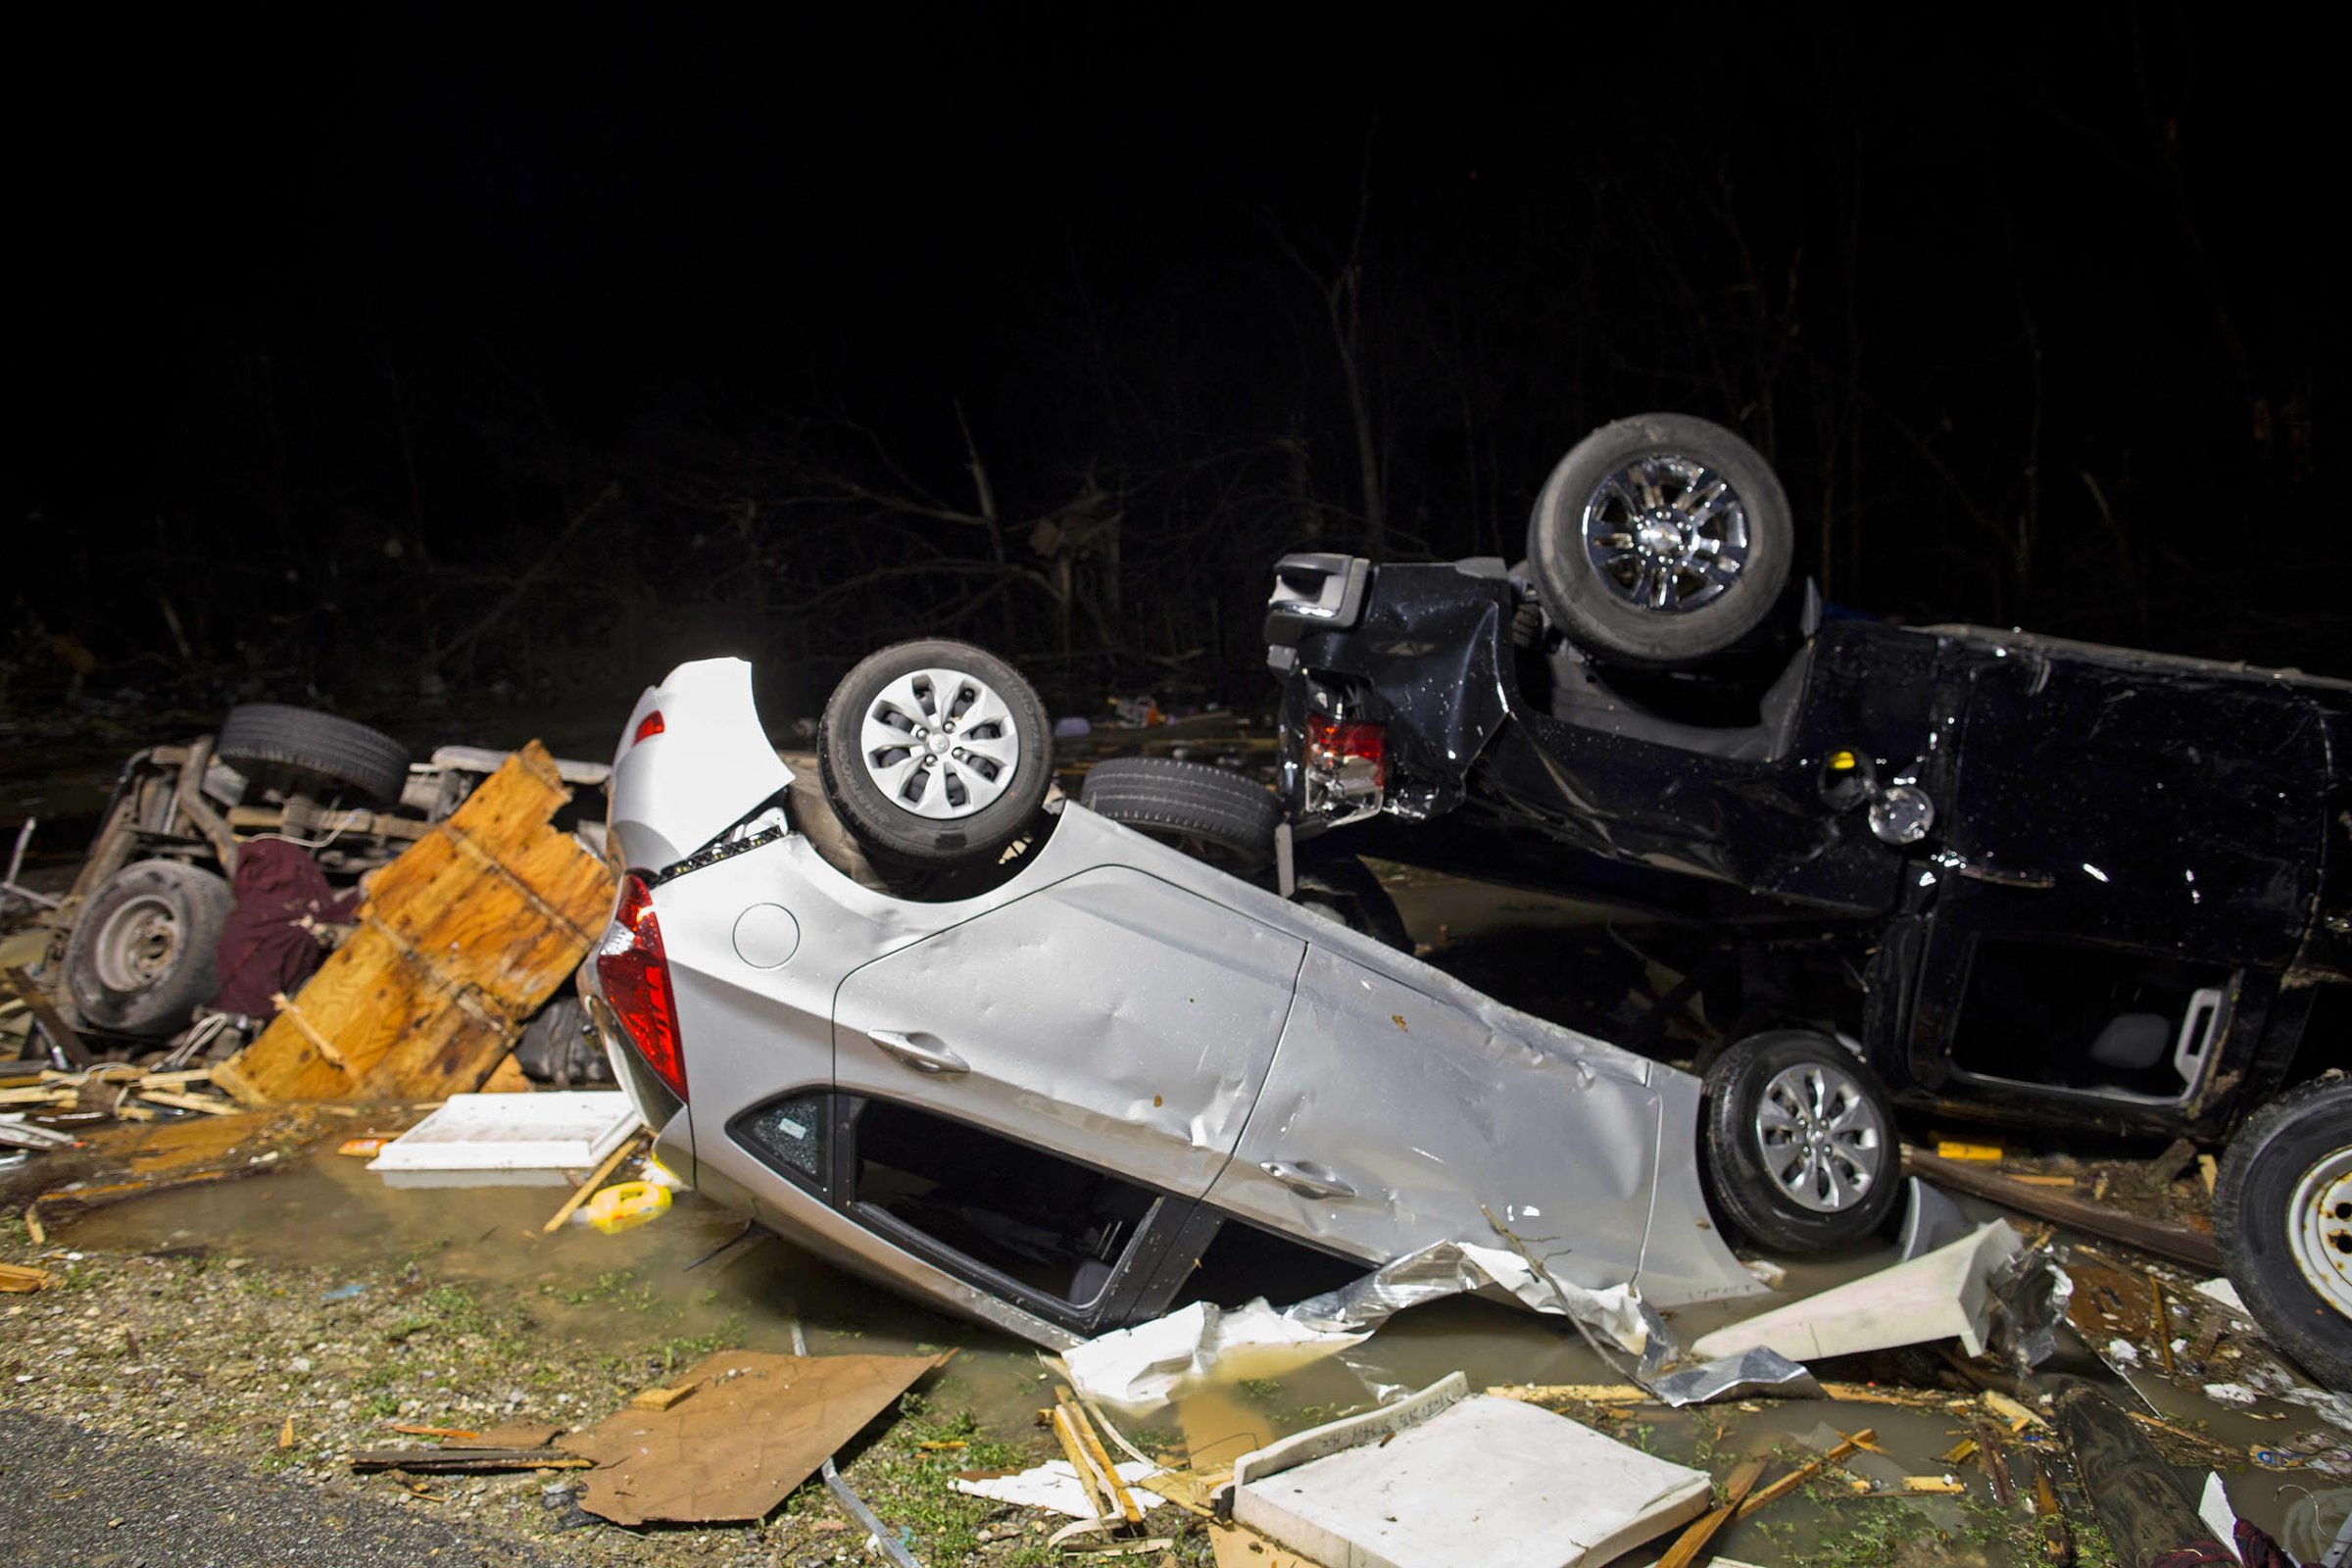 Destroyed trailers and vehicles are all that remain of the Sugar Hill RV Park after a suspected tornado hit in Convent, La., Feb. 23, 2016.